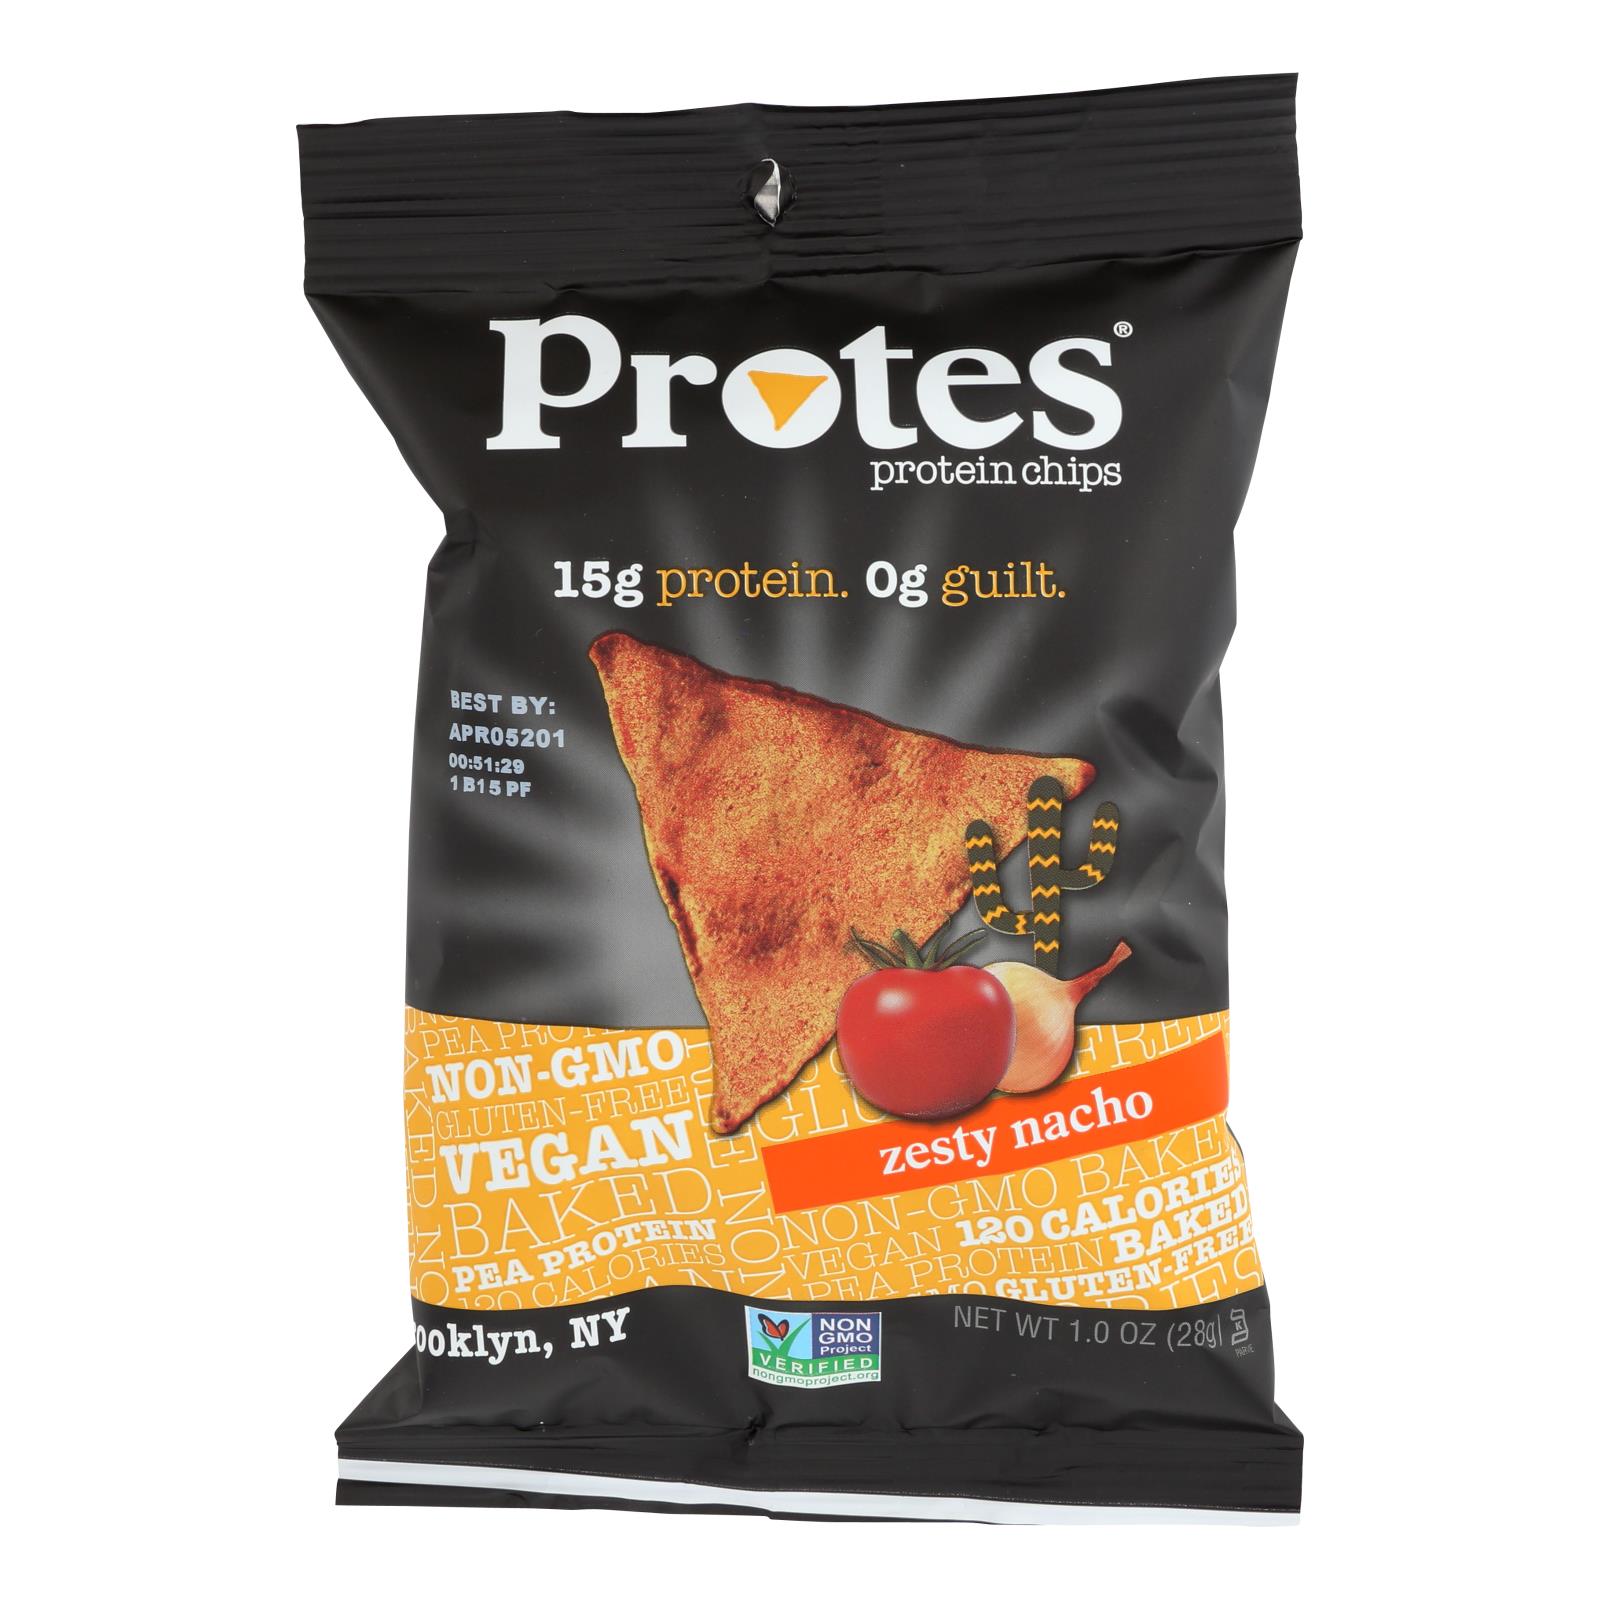 Protes Protein Chips Protein Chips - Case of 24 - 1 OZ